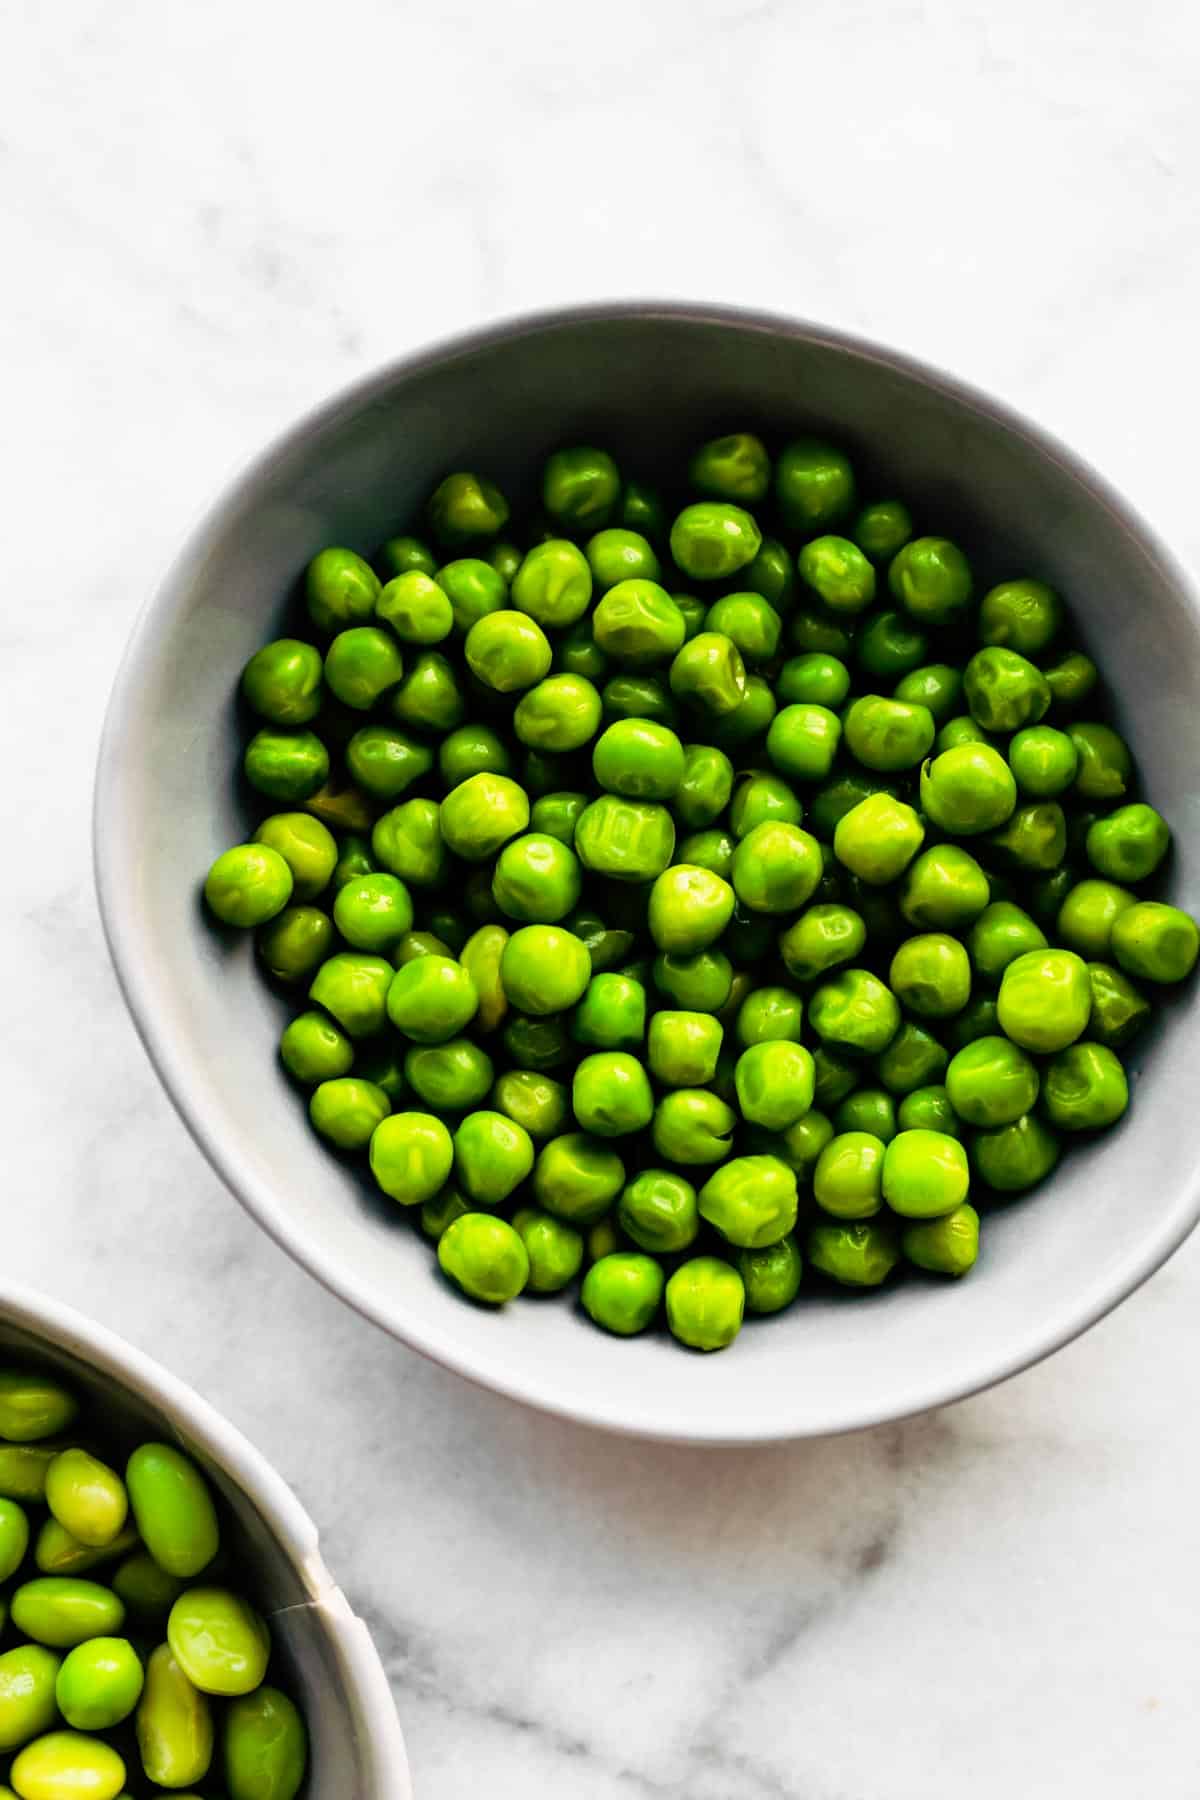 A bowl of green peas on a table.